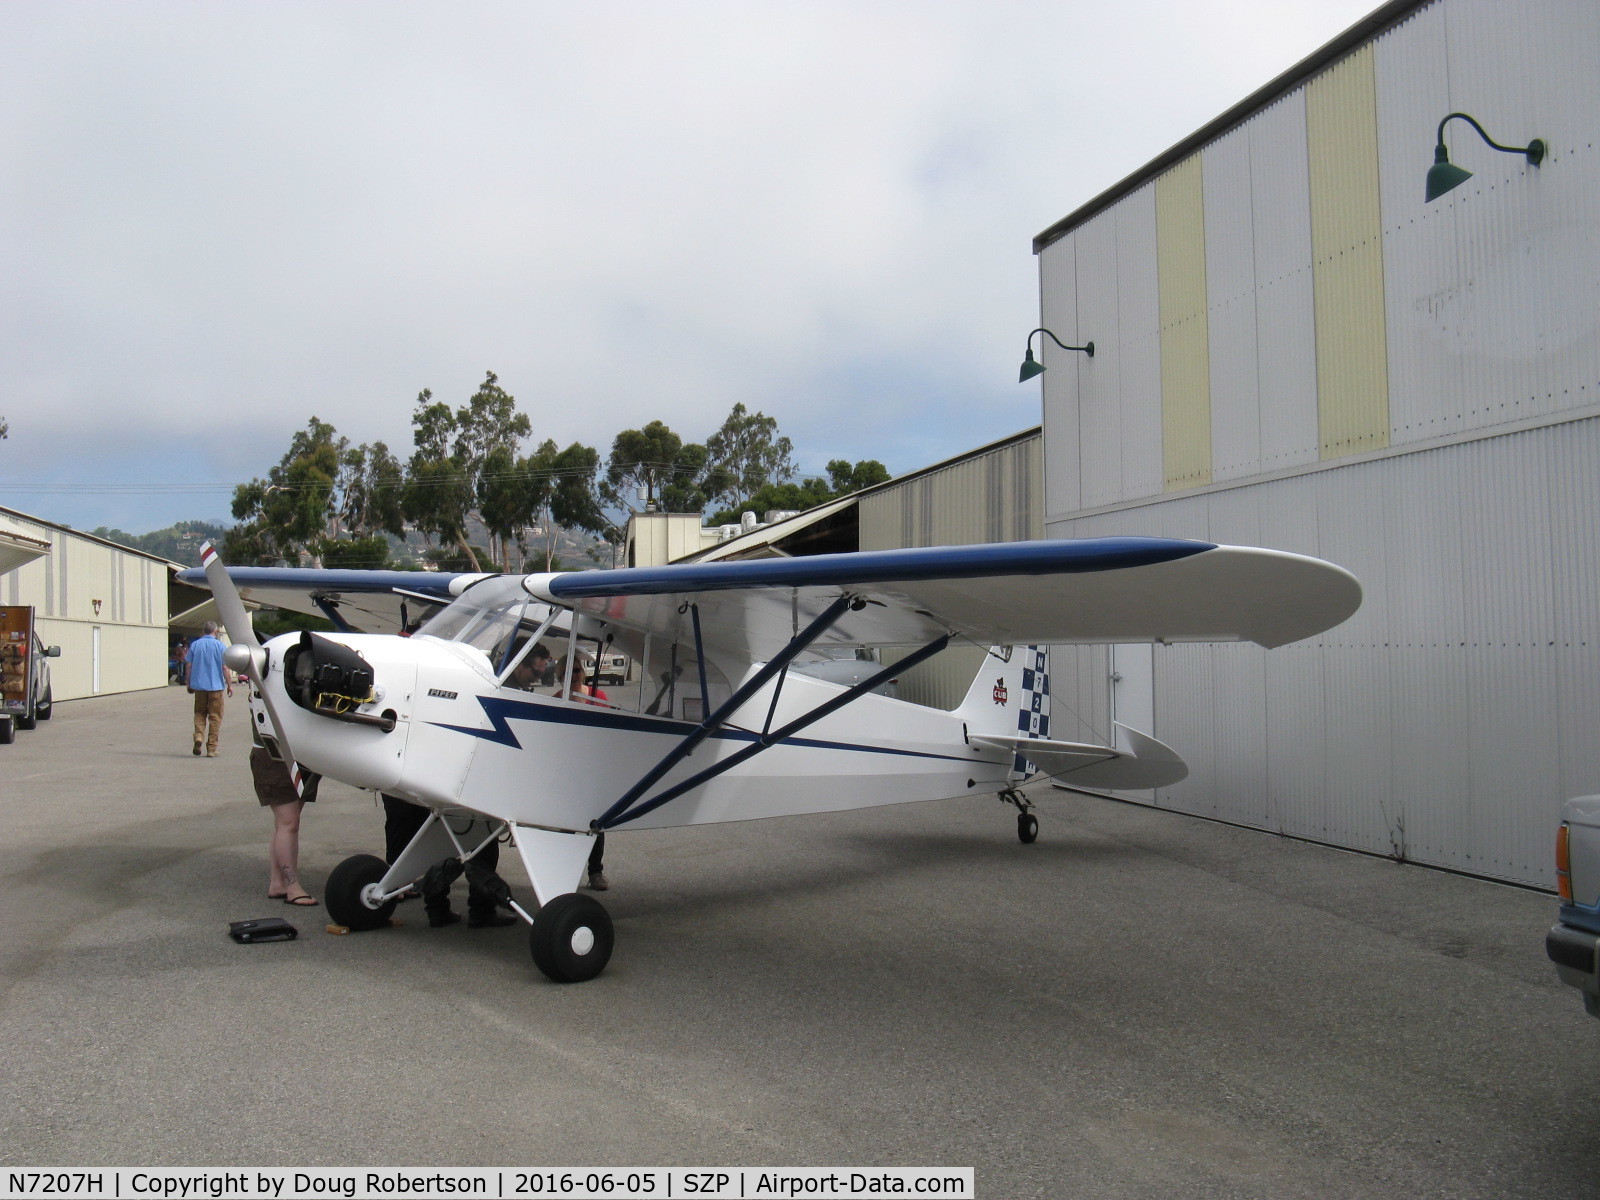 N7207H, 1946 Piper J3C-65 Cub C/N 20473, 1946 Piper J3C-65 CUB, Continental A&C65 65 Hp, Clipped wings, Experimental class, feature aircraft at Aviation Museum of Santa Paula First Sunday Open House-promoting Flight Scholarships